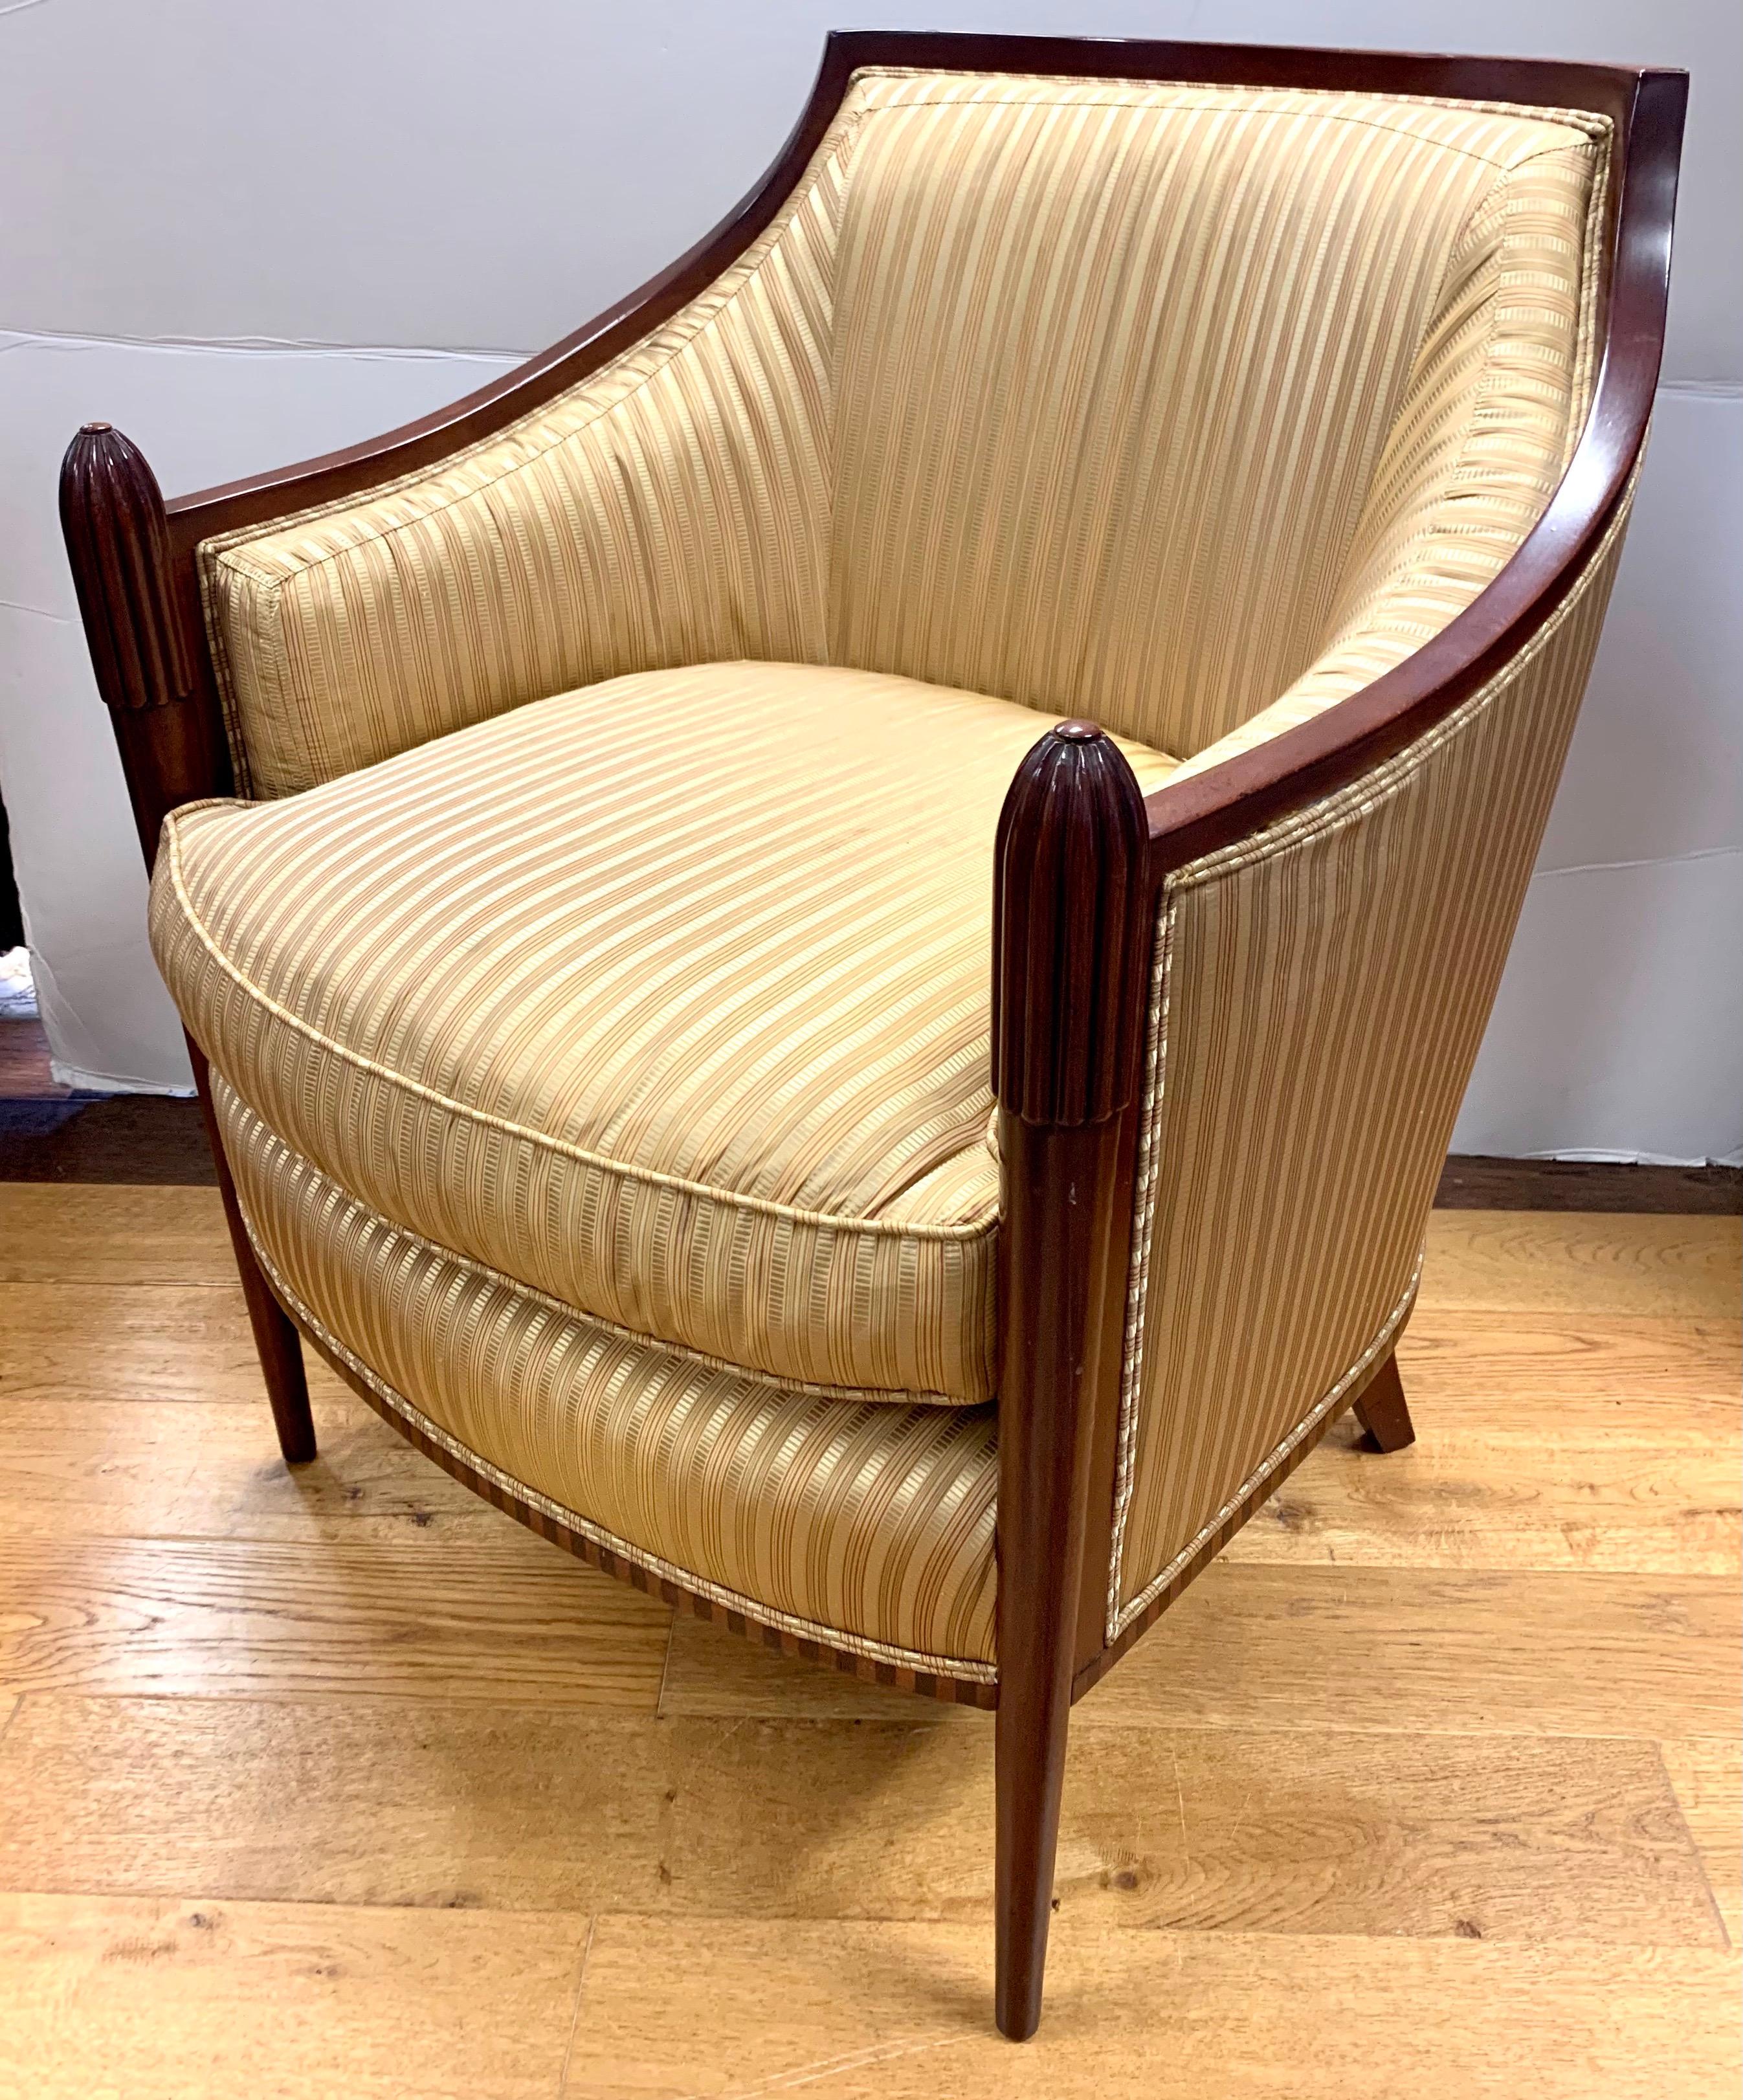 Elegant Baker mahogany barrel back armchair upholstered in a gold silk fabric features carved fluted arm to leg detail. Neutral color scheme makes it a timeless addition to any space.